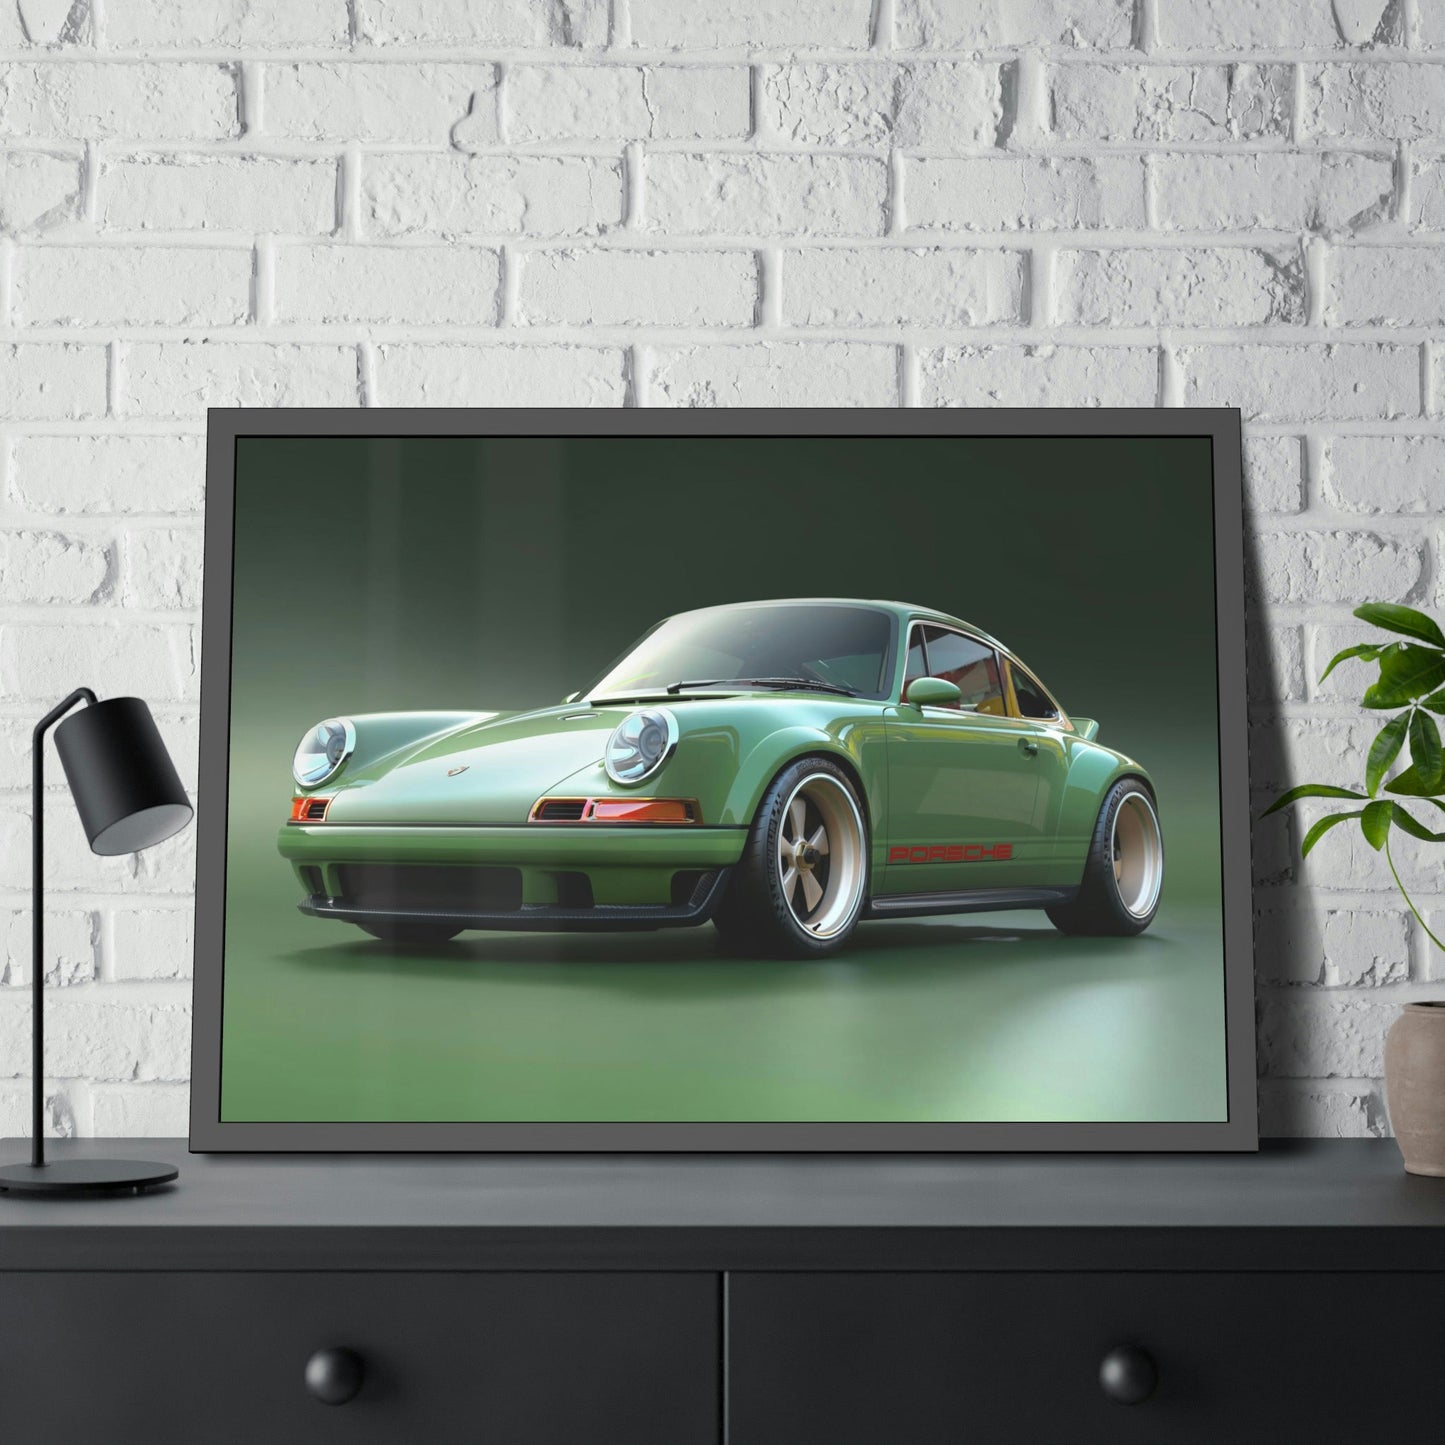 Porsche Dreams: Poster or Canvas Print for Inspiration and Motivation